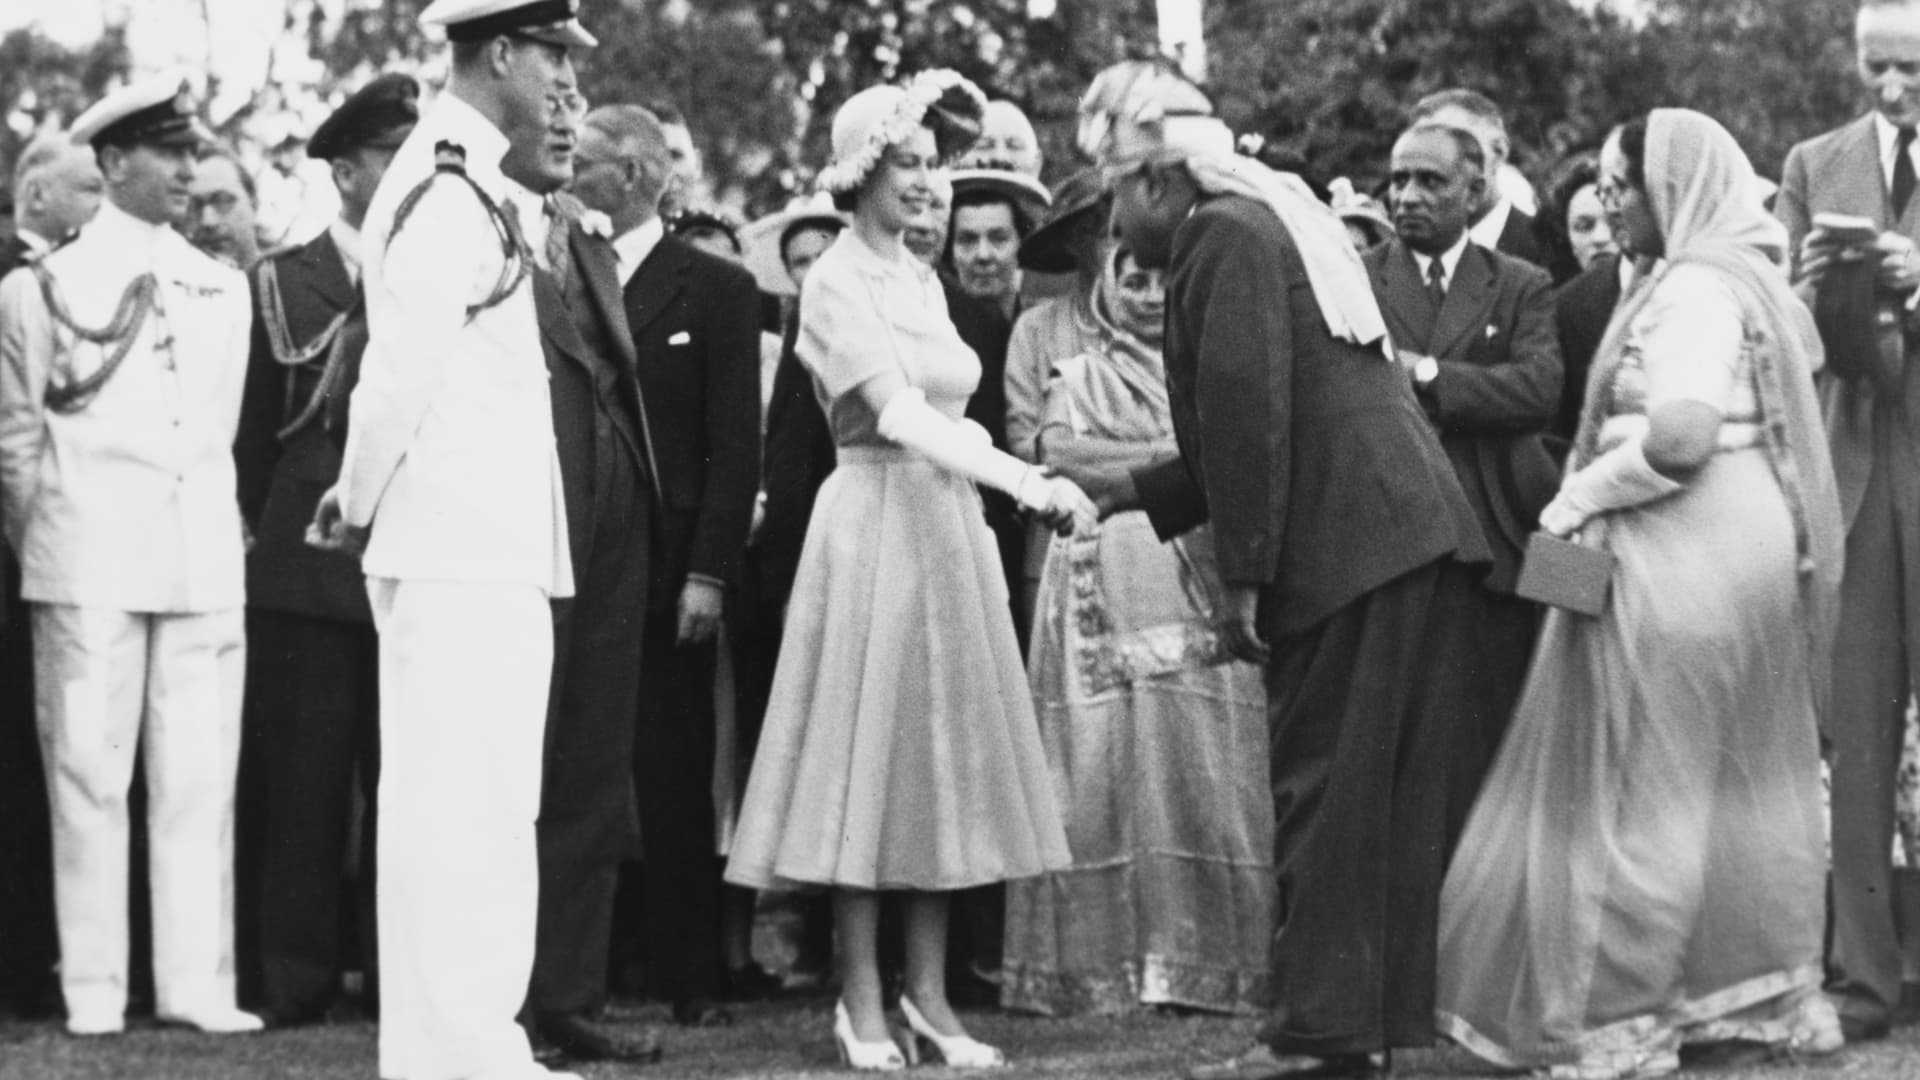 Kenya, Princess Elizabeth and The Duke of Edinburgh are formally greeted by an Asian man who is shaking the Princess's hand. Beside him stands an Asian woman wearing traditional dress.